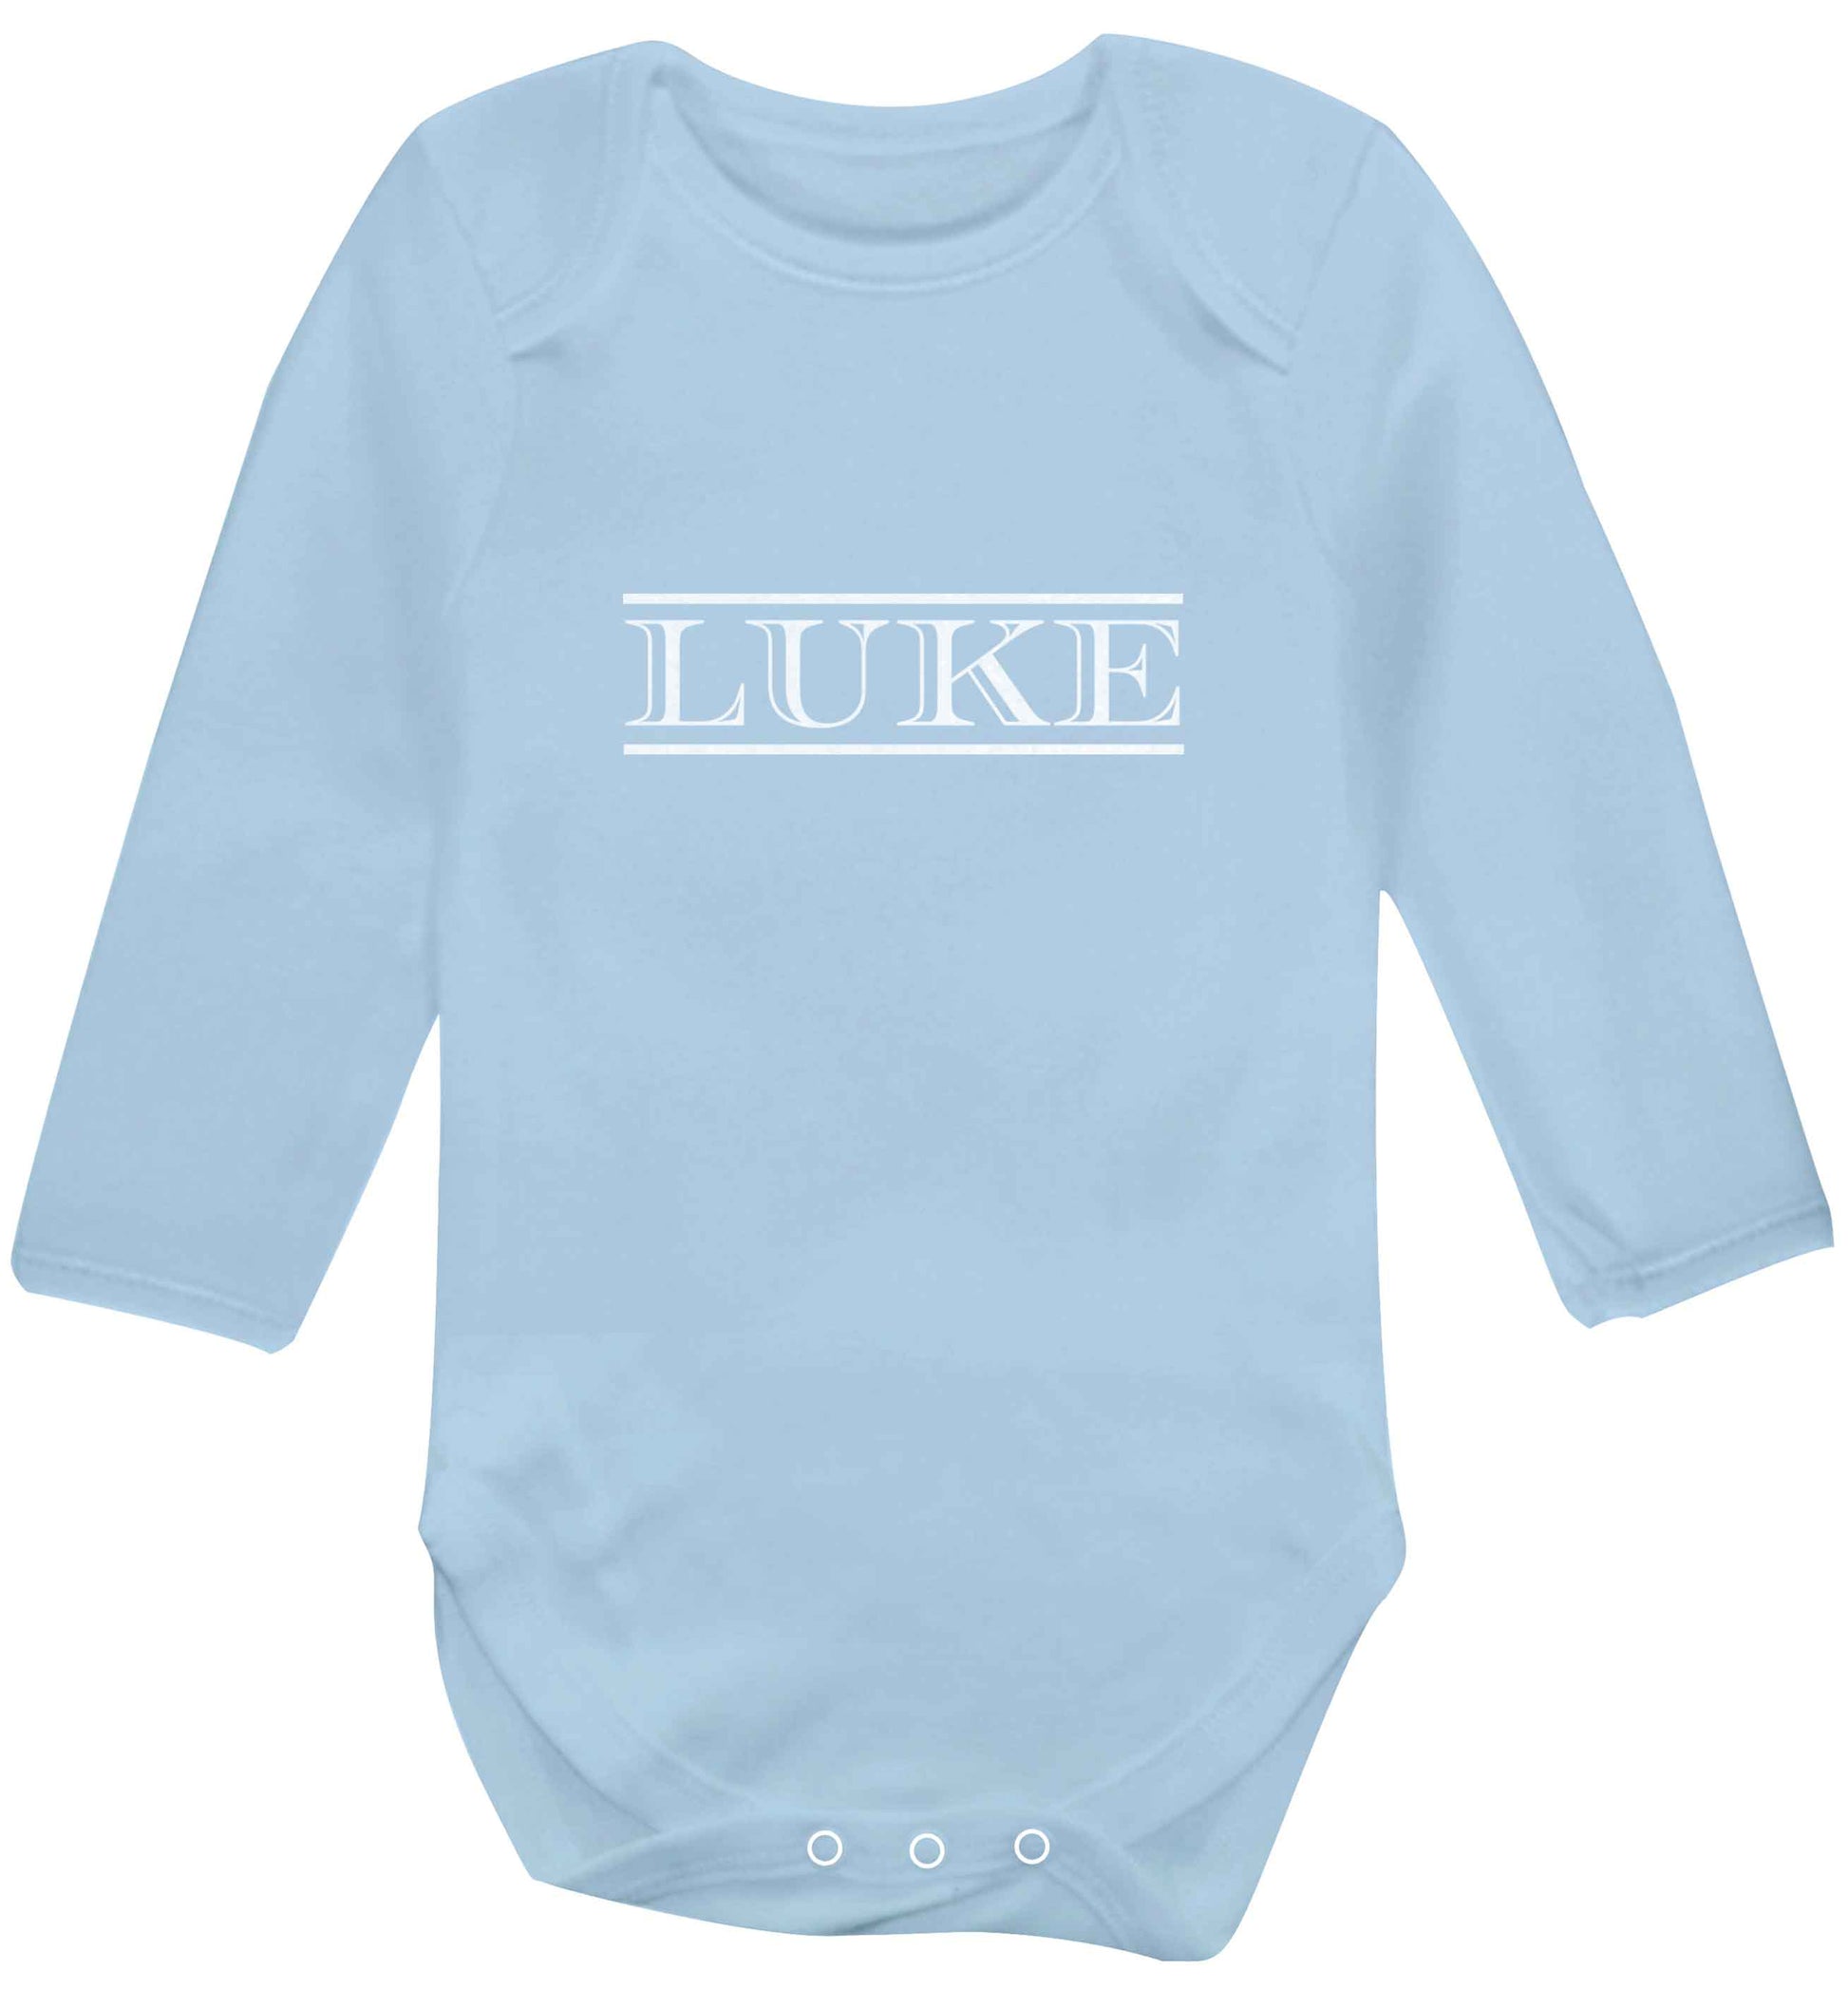 Personalised name baby vest long sleeved pale blue 6-12 months